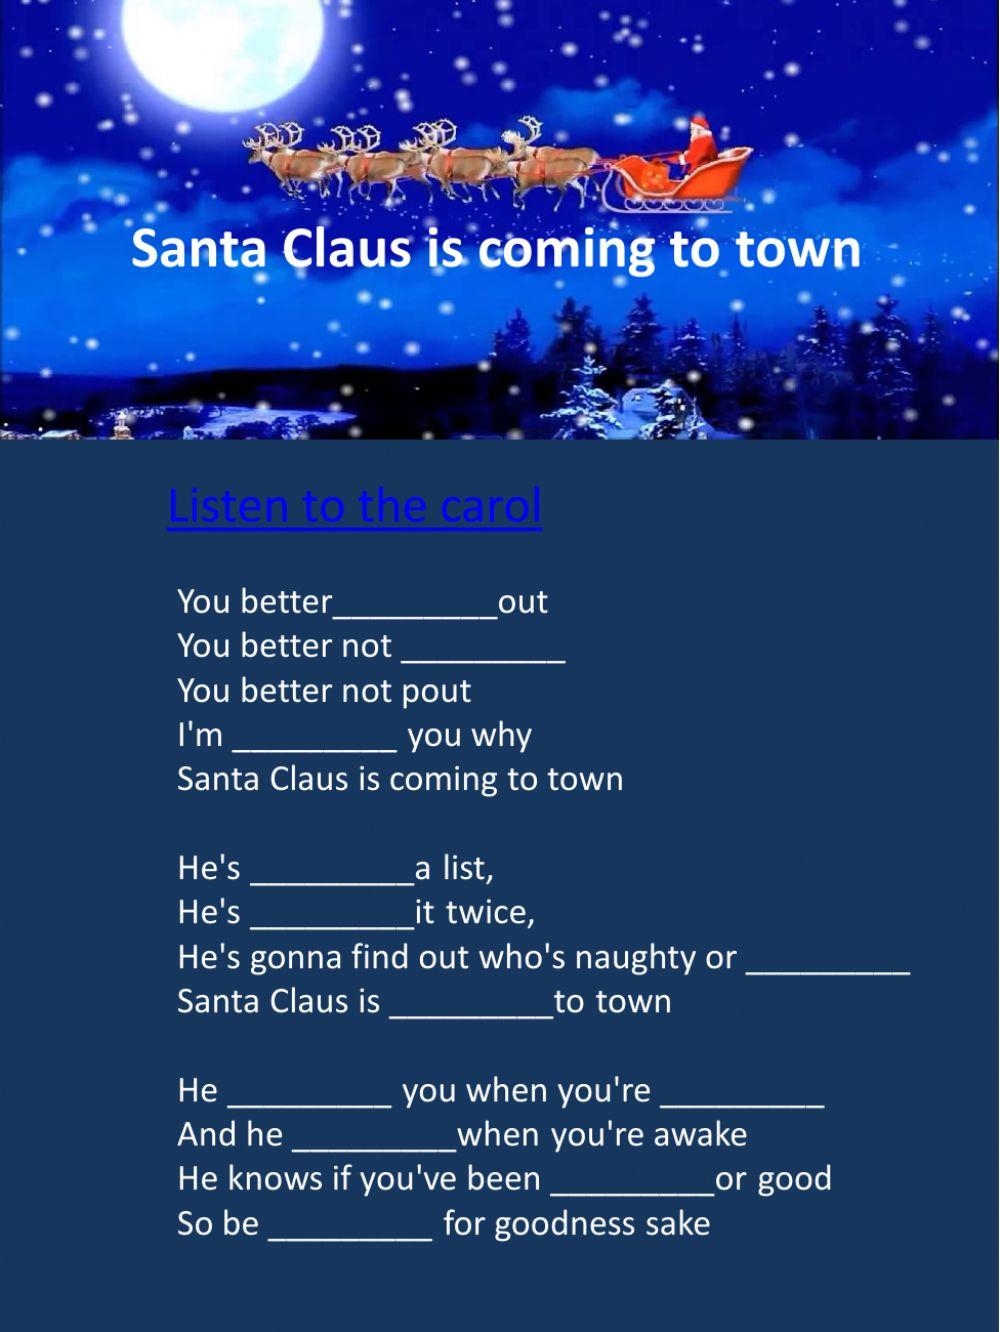 Santa Claus is coming to town